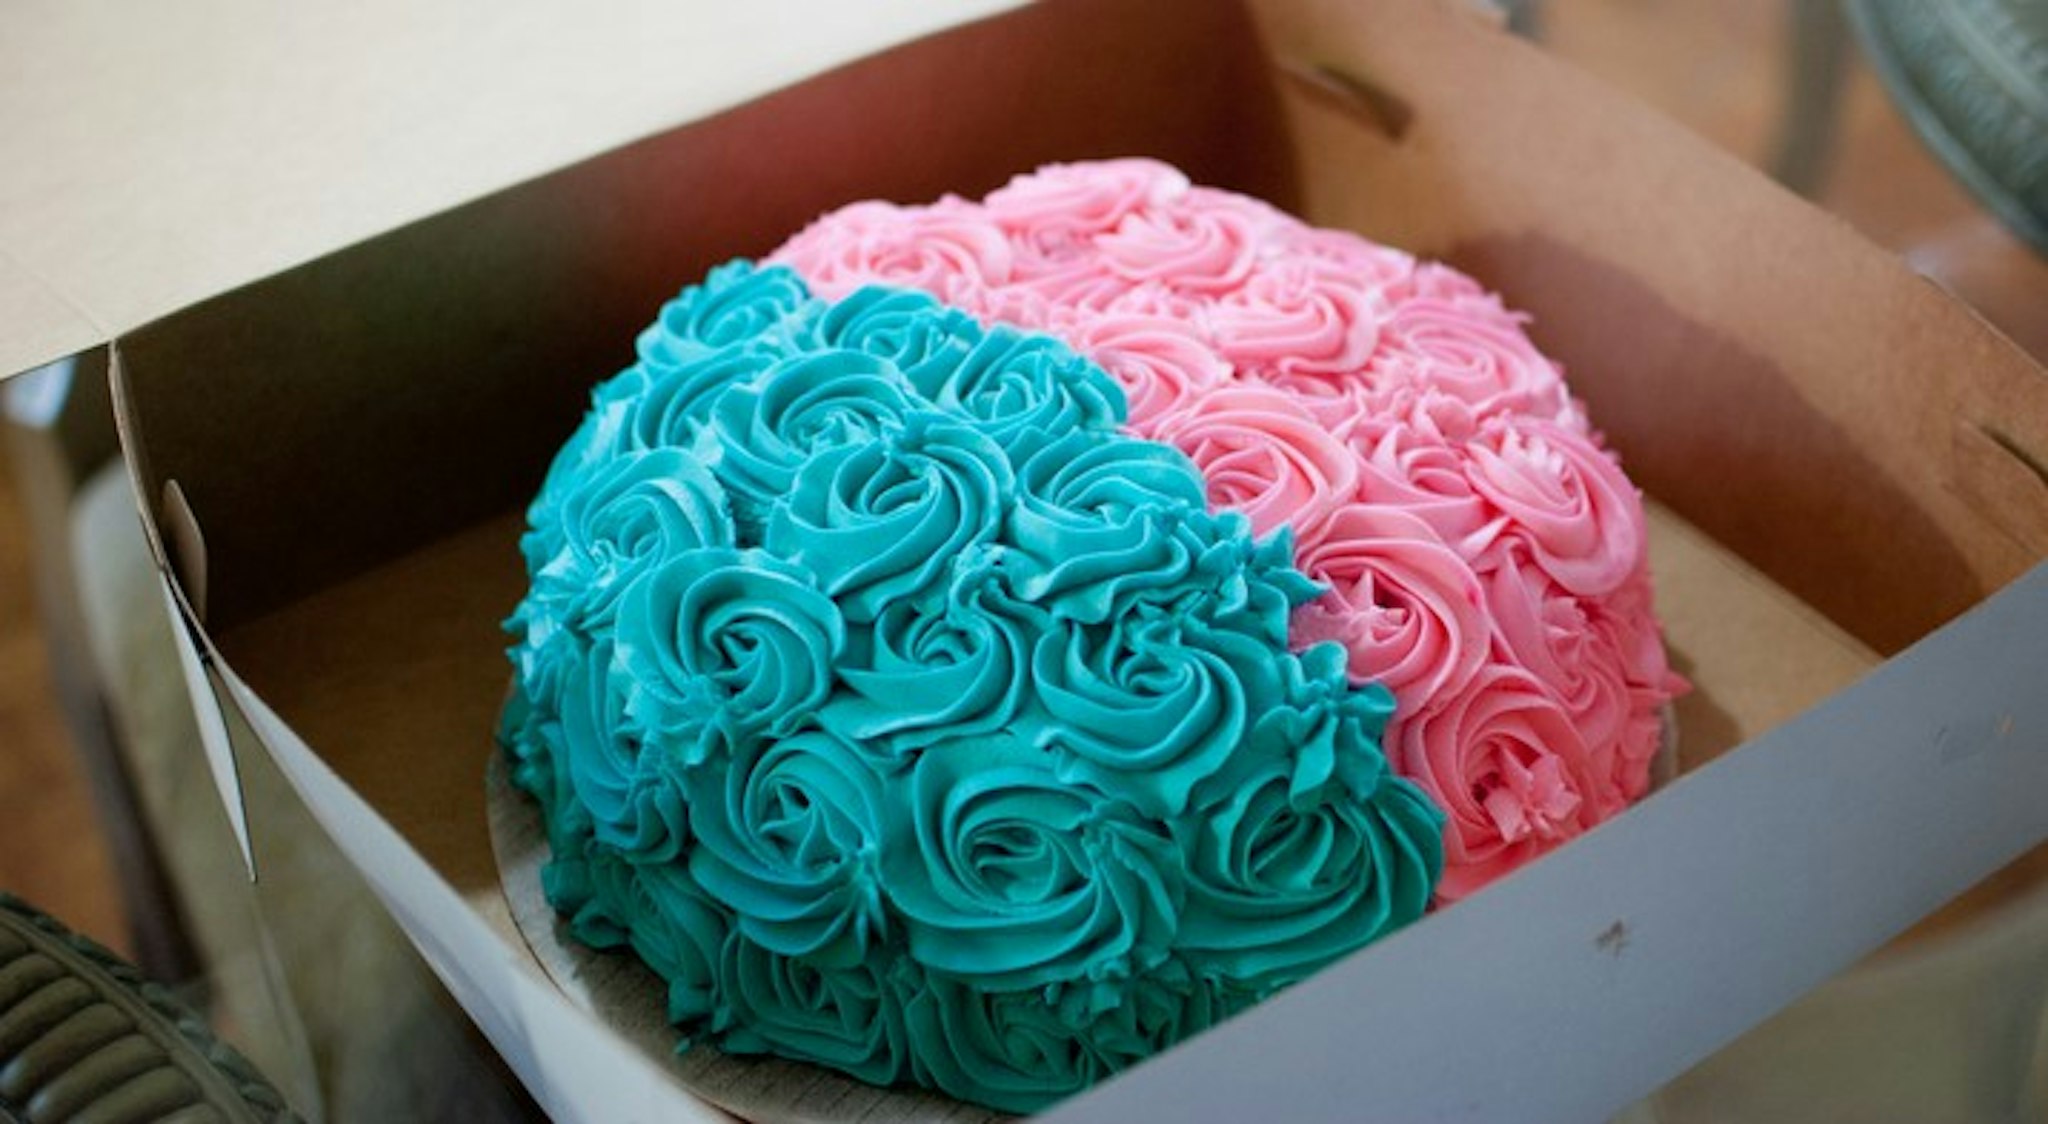 A pink and blue cake used at a gender reveal baby shower.